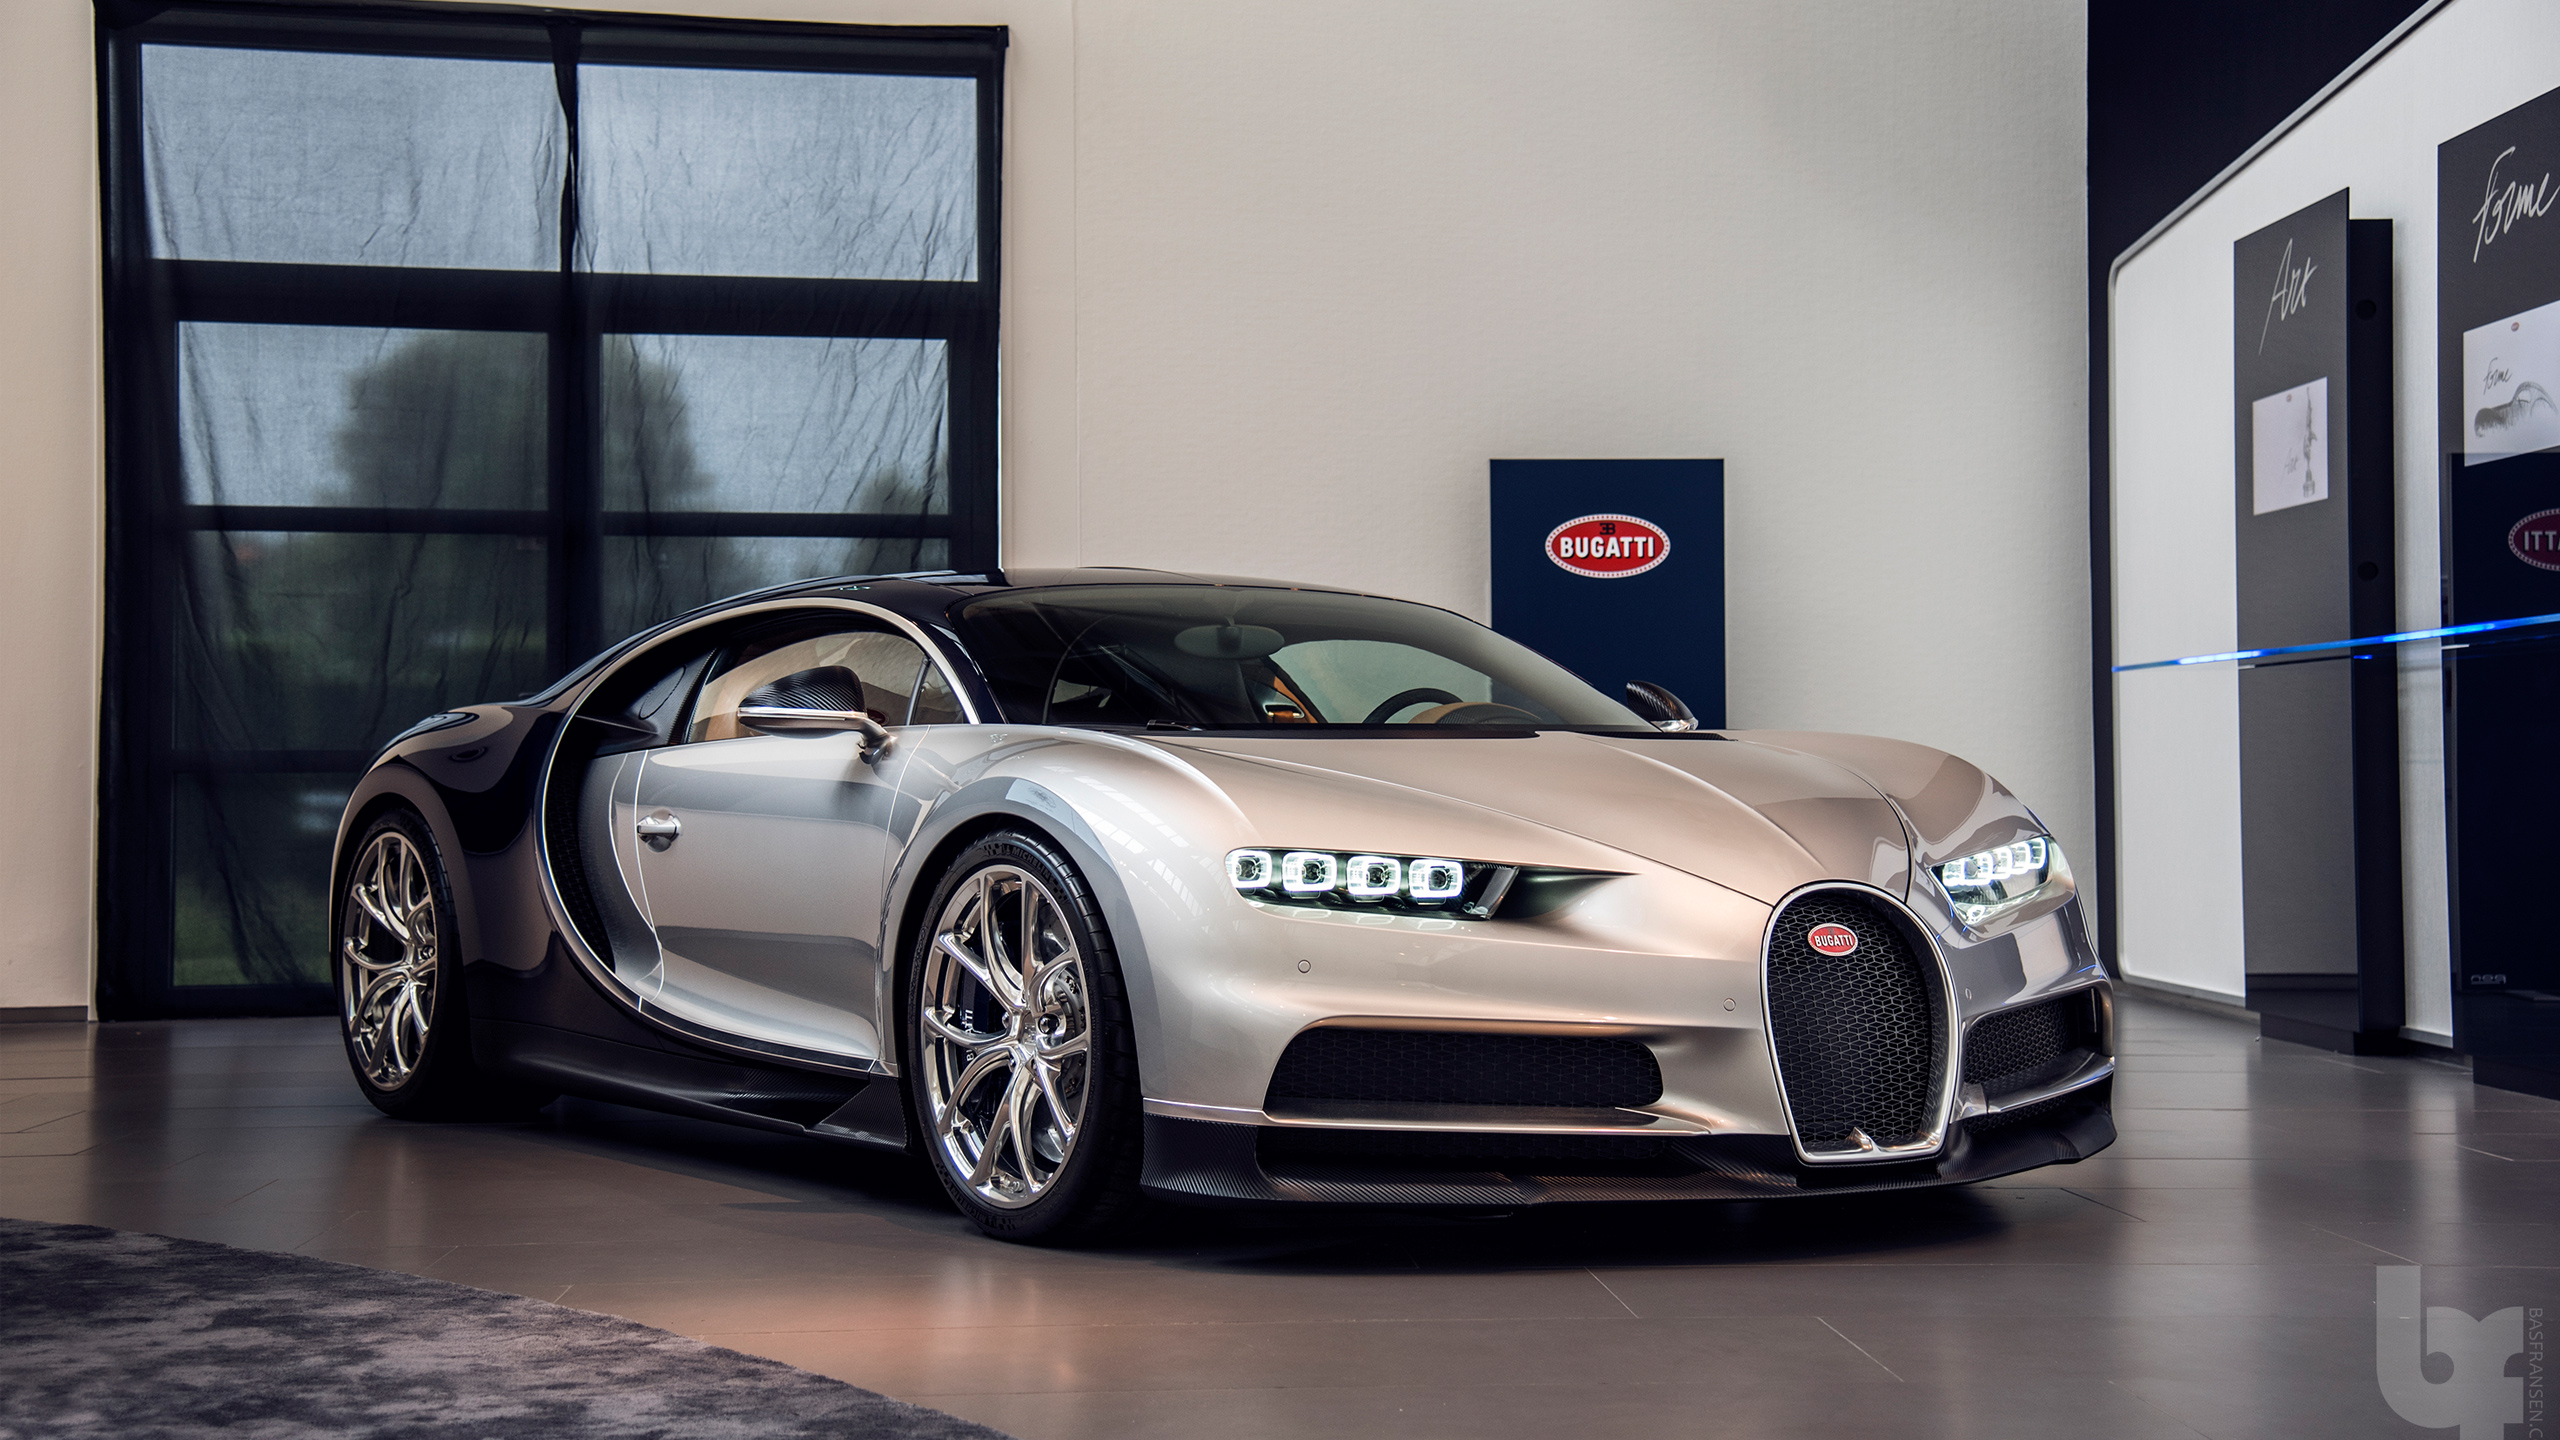 Download wallpaper for 240x320 resolution | Bugatti Chiron Most Expensive  CarSimilar Car Wallpapers | cars | Wallpaper Better